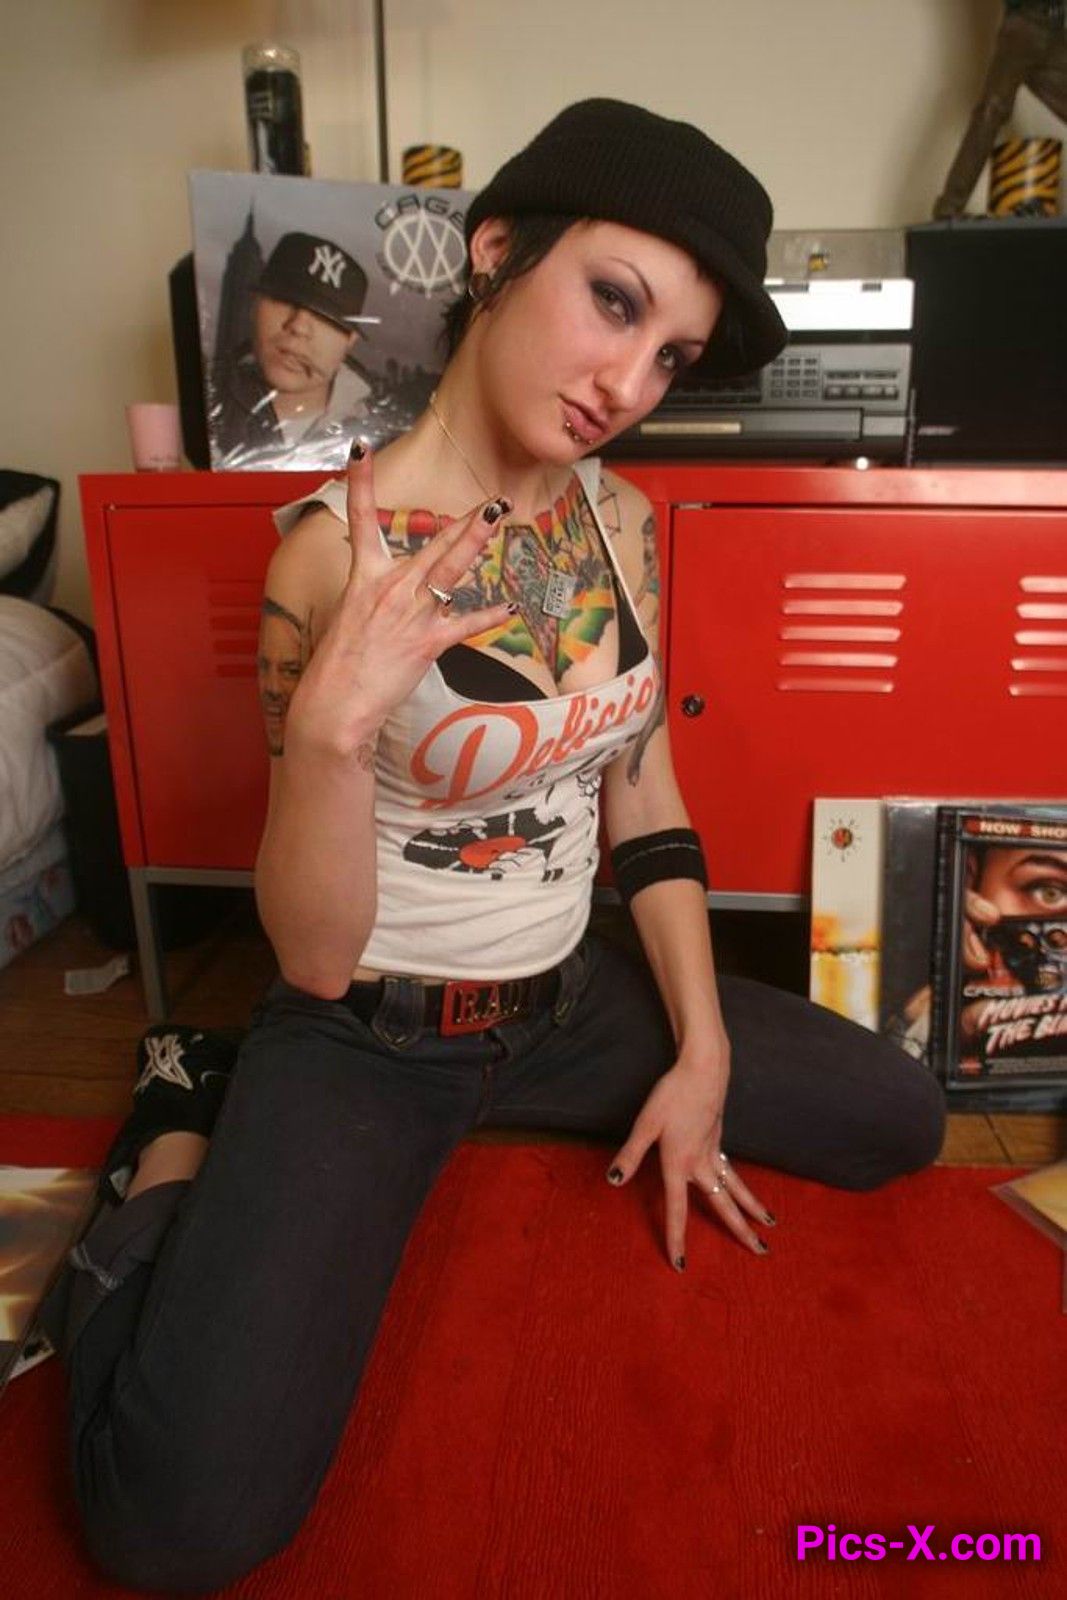 Inked up punk girl getting naked with some vinyl - Punk Rock Girlfriend - Image 1